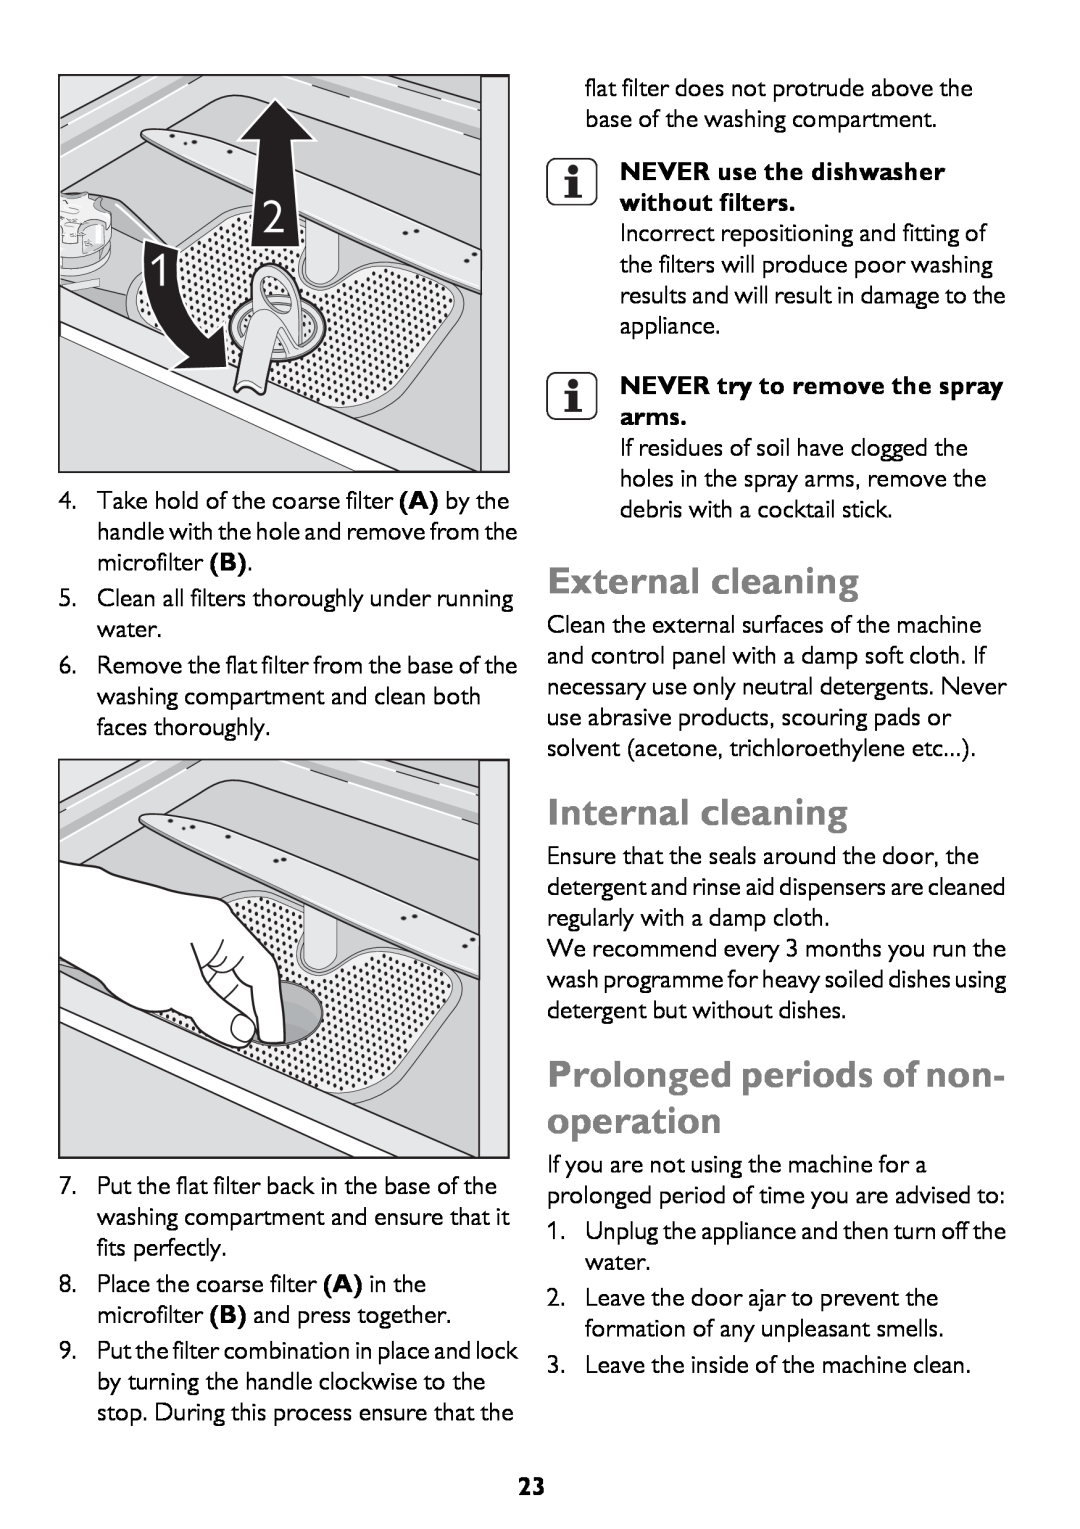 John Lewis JLDWW 1206 instruction manual External cleaning, Internal cleaning, Prolonged periods of non- operation 